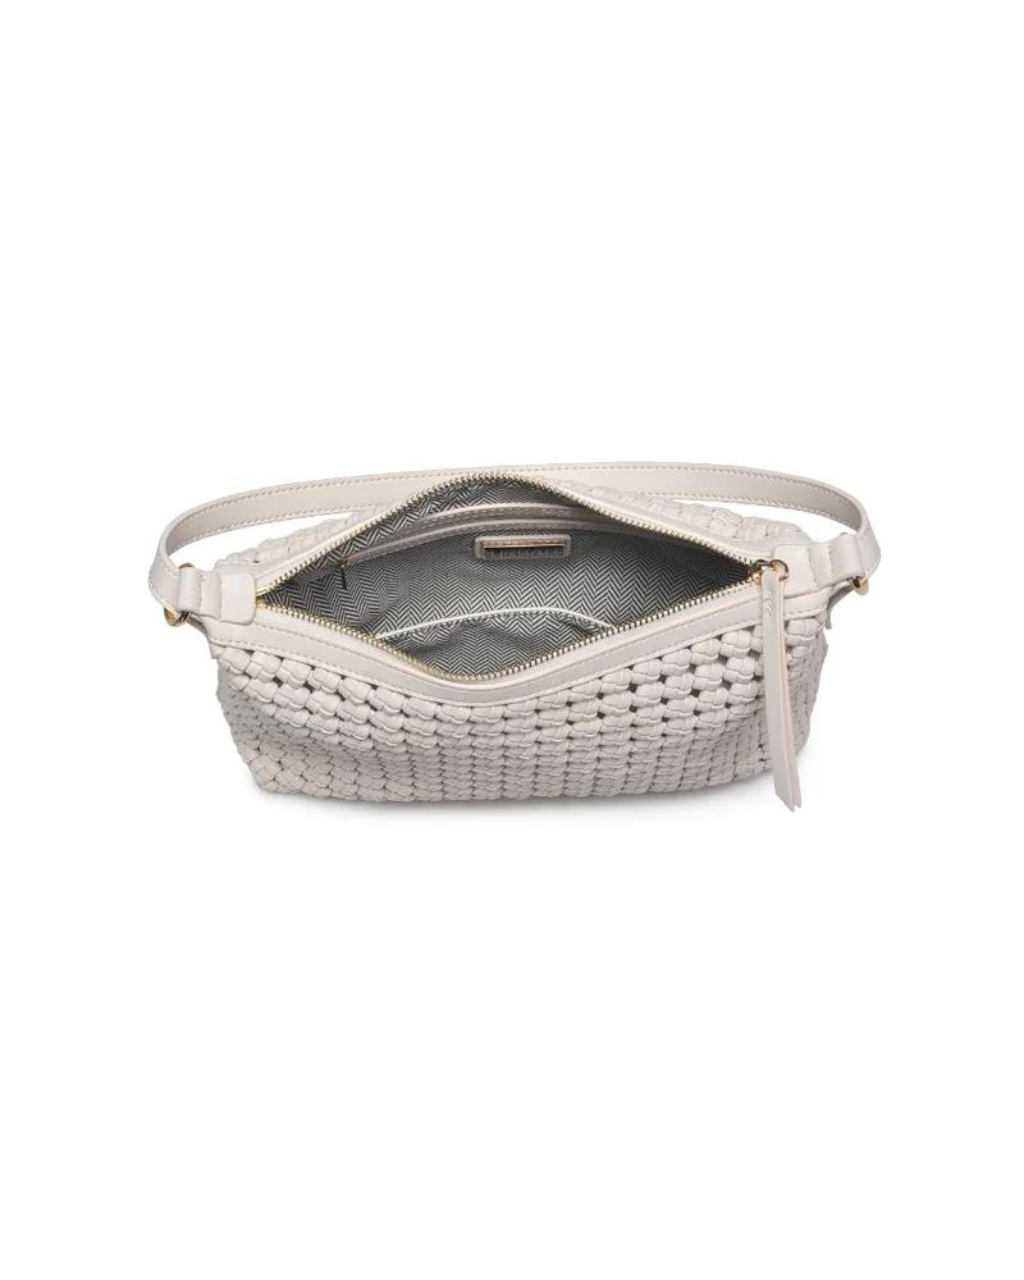 Dottie Crossbody Bag Ivory, Evening Bag by Urban Expressions | LIT Boutique